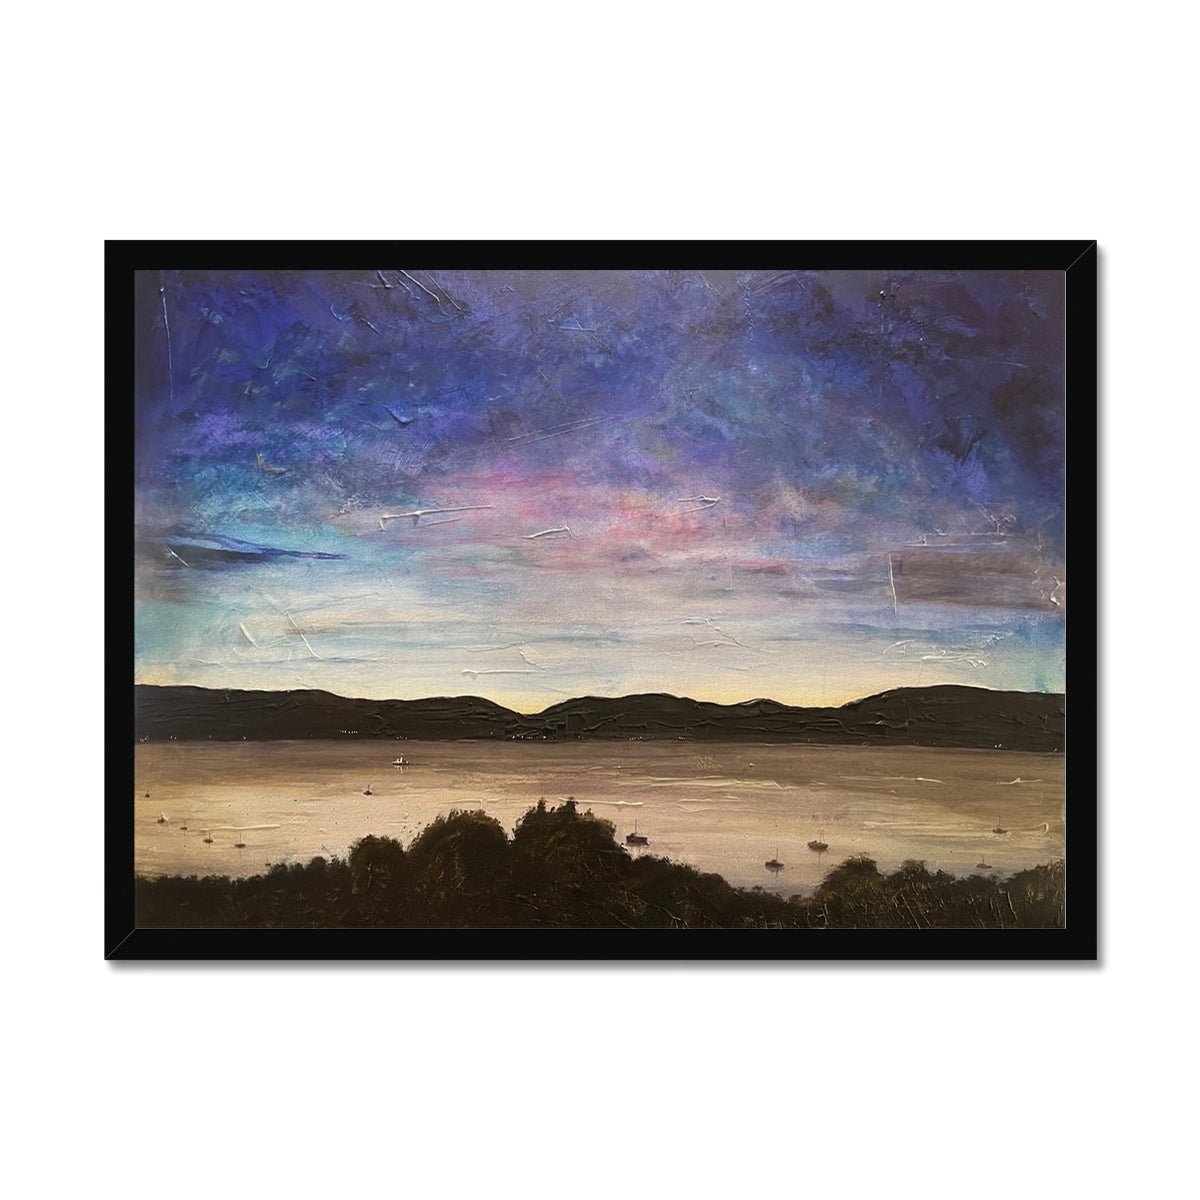 River Clyde Twilight Painting | Framed Prints From Scotland-Framed Prints-River Clyde Art Gallery-A2 Landscape-Black Frame-Paintings, Prints, Homeware, Art Gifts From Scotland By Scottish Artist Kevin Hunter